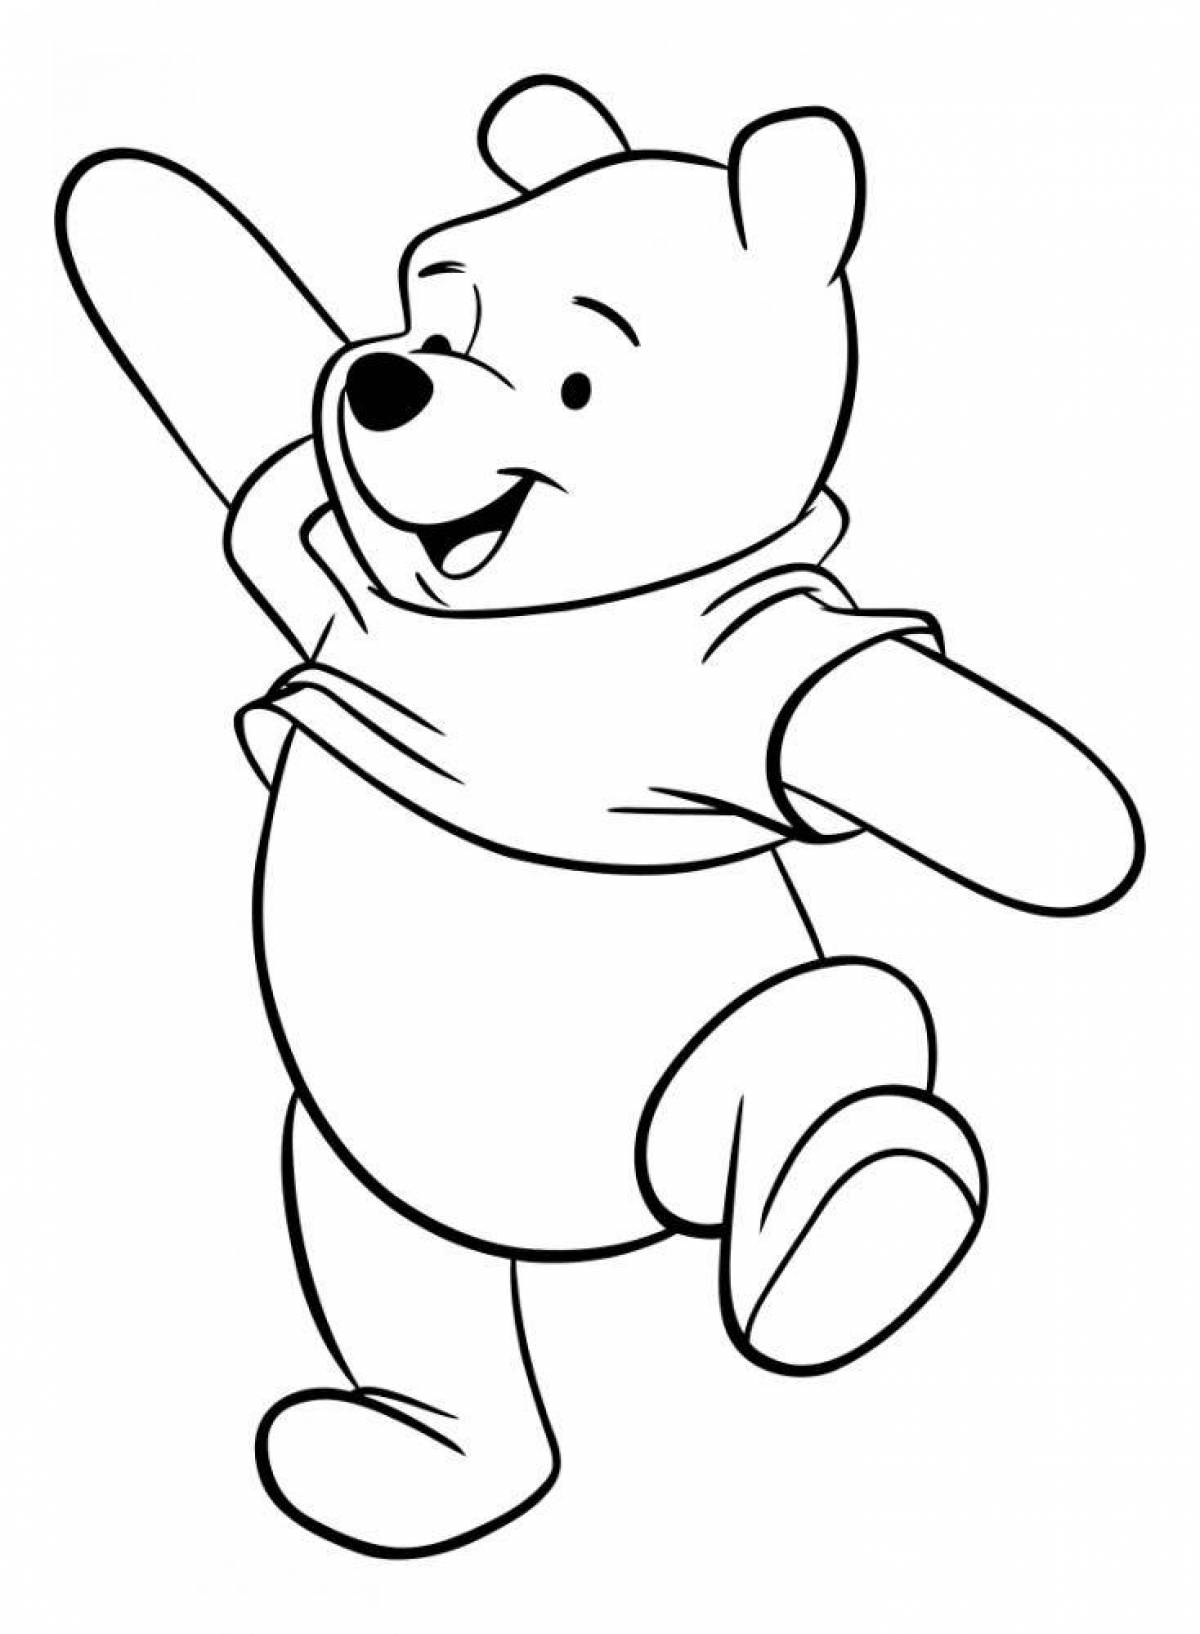 Coloring page of a playful cartoon character